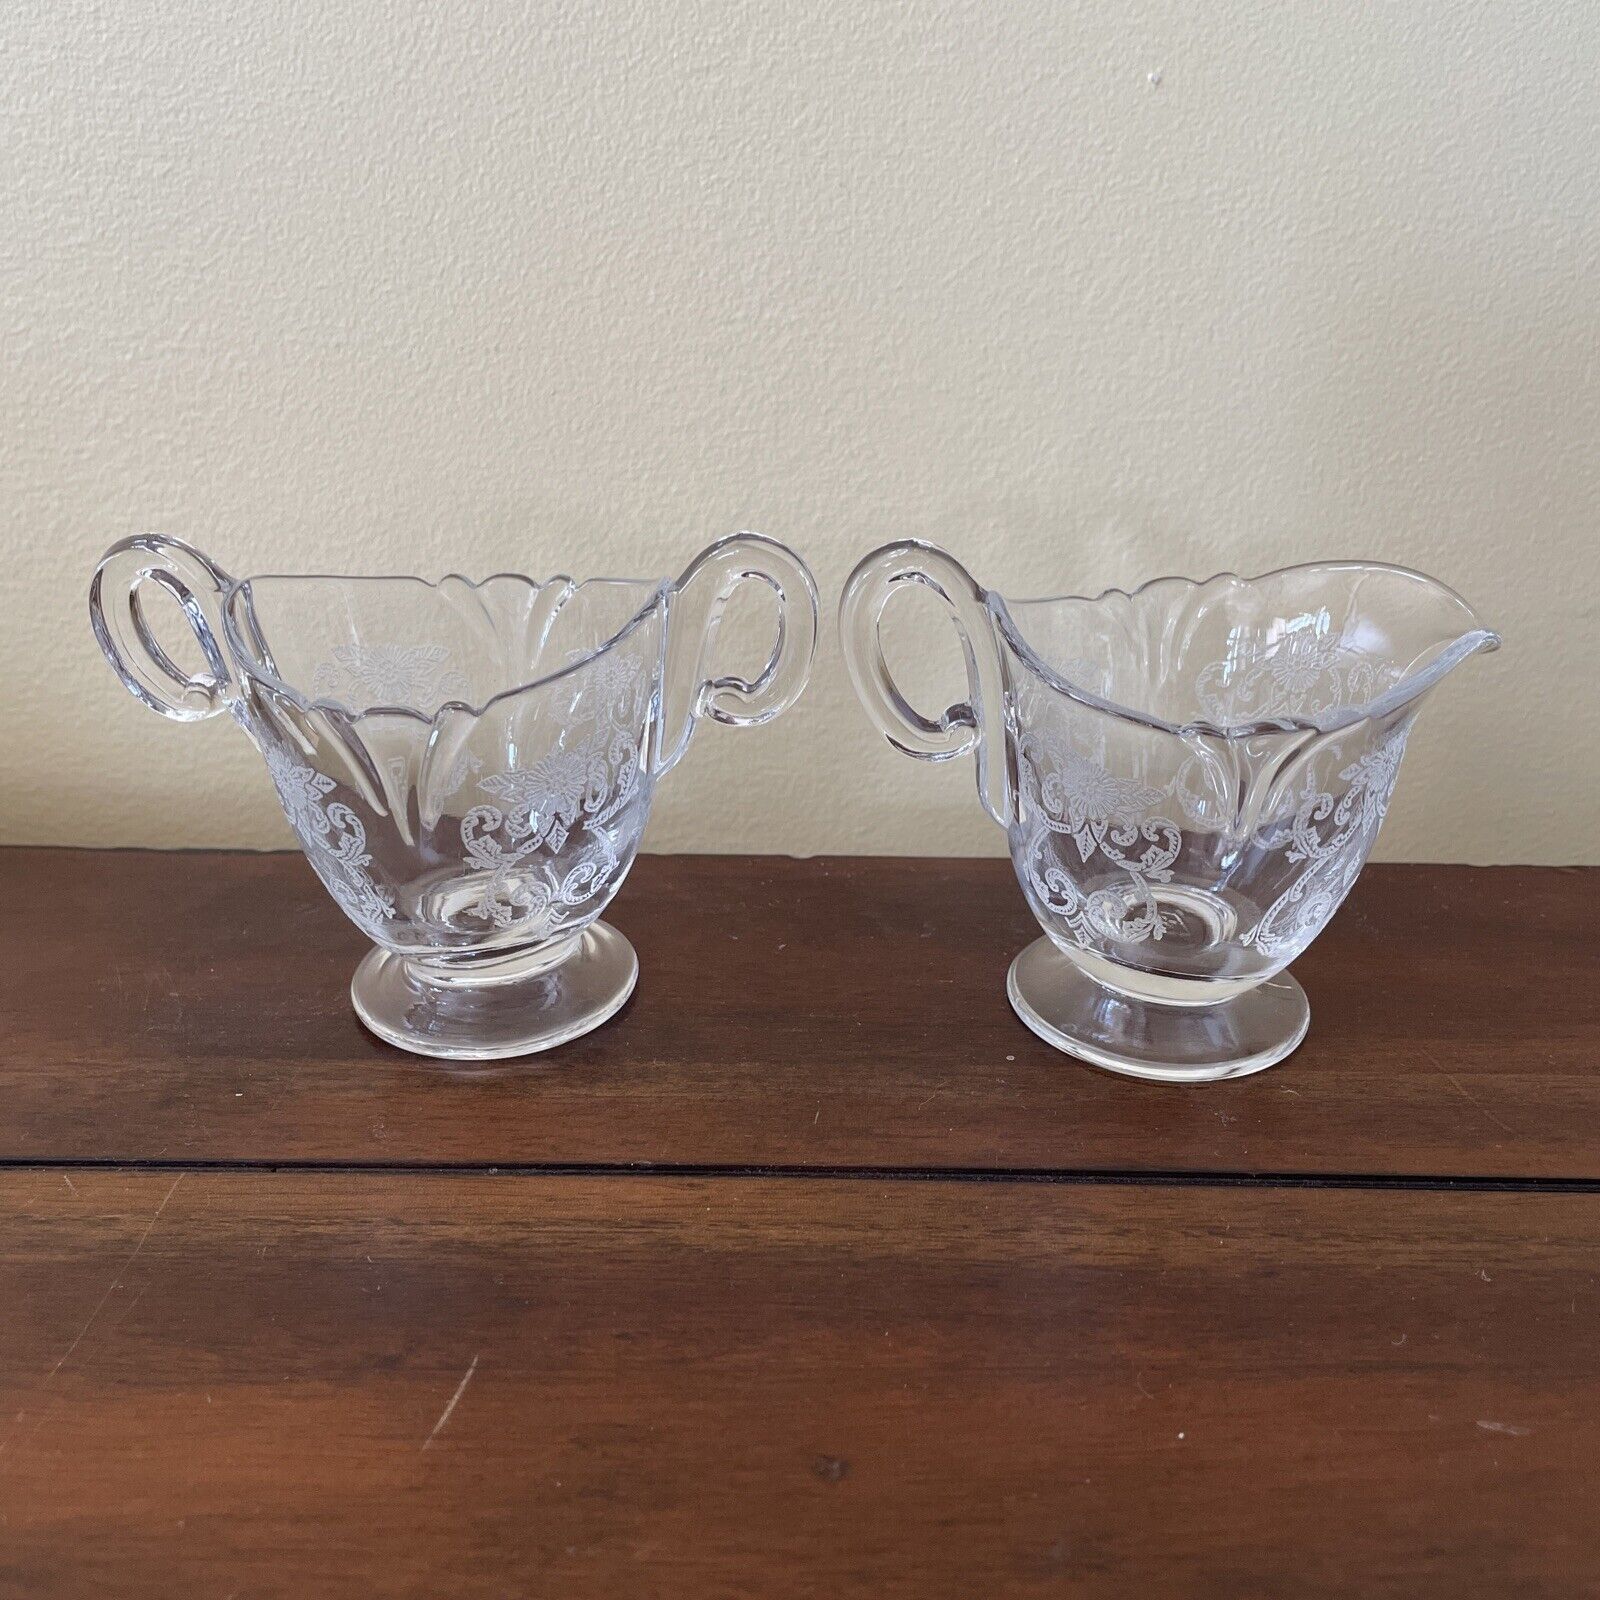 Heisey Cream and Sugar Bowl Clear Etched Glass Floral